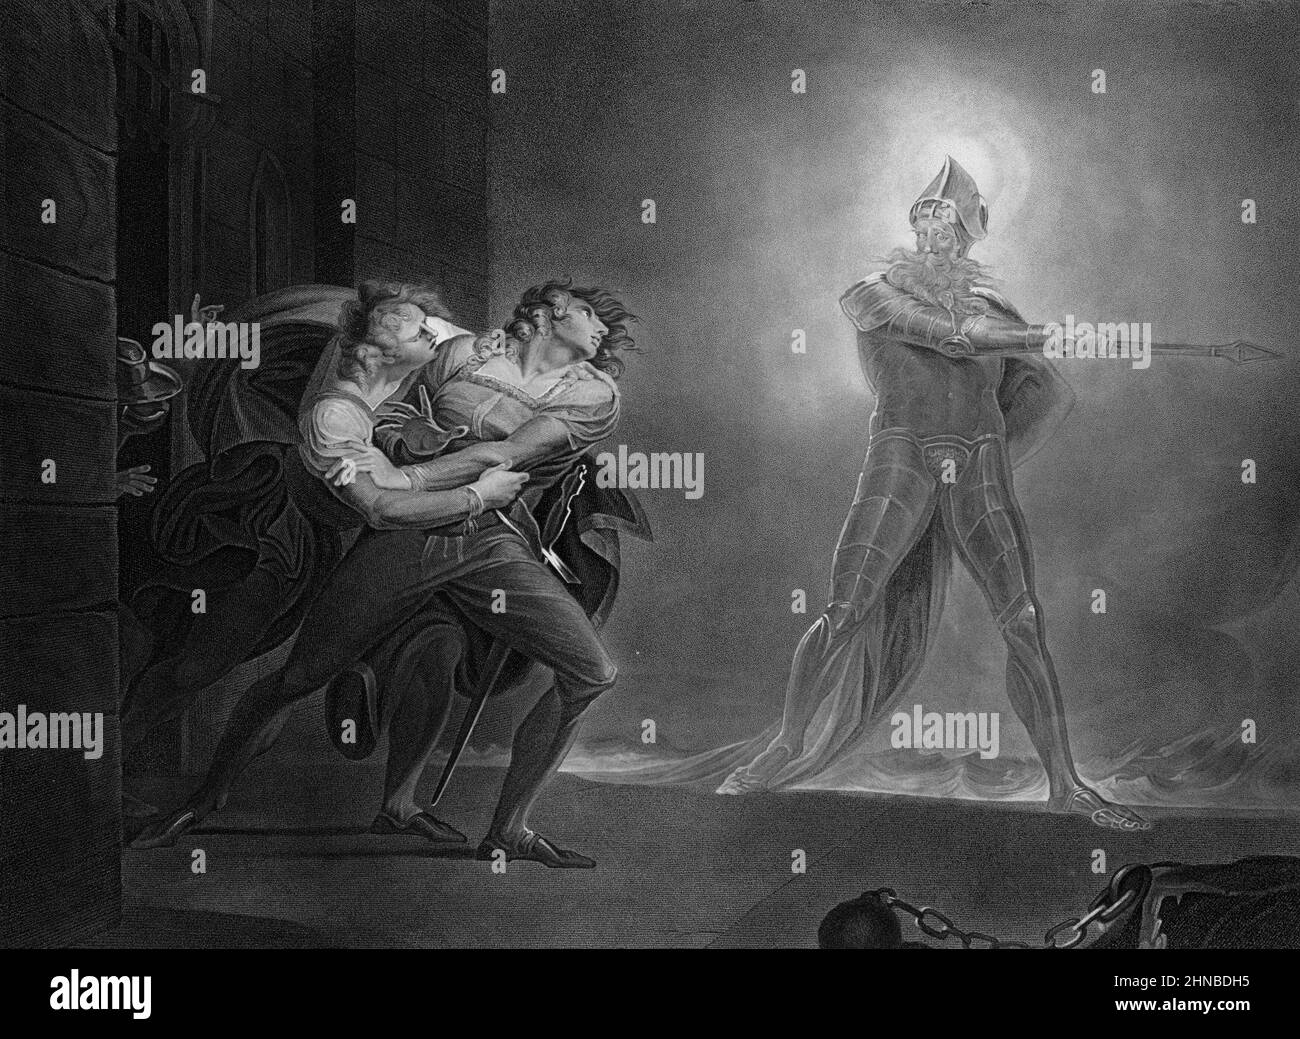 Hamlet, Horatio, Marcellus and the Ghost from Shakespeare's Hamlet, Act 1, Scene 4 Stock Photo